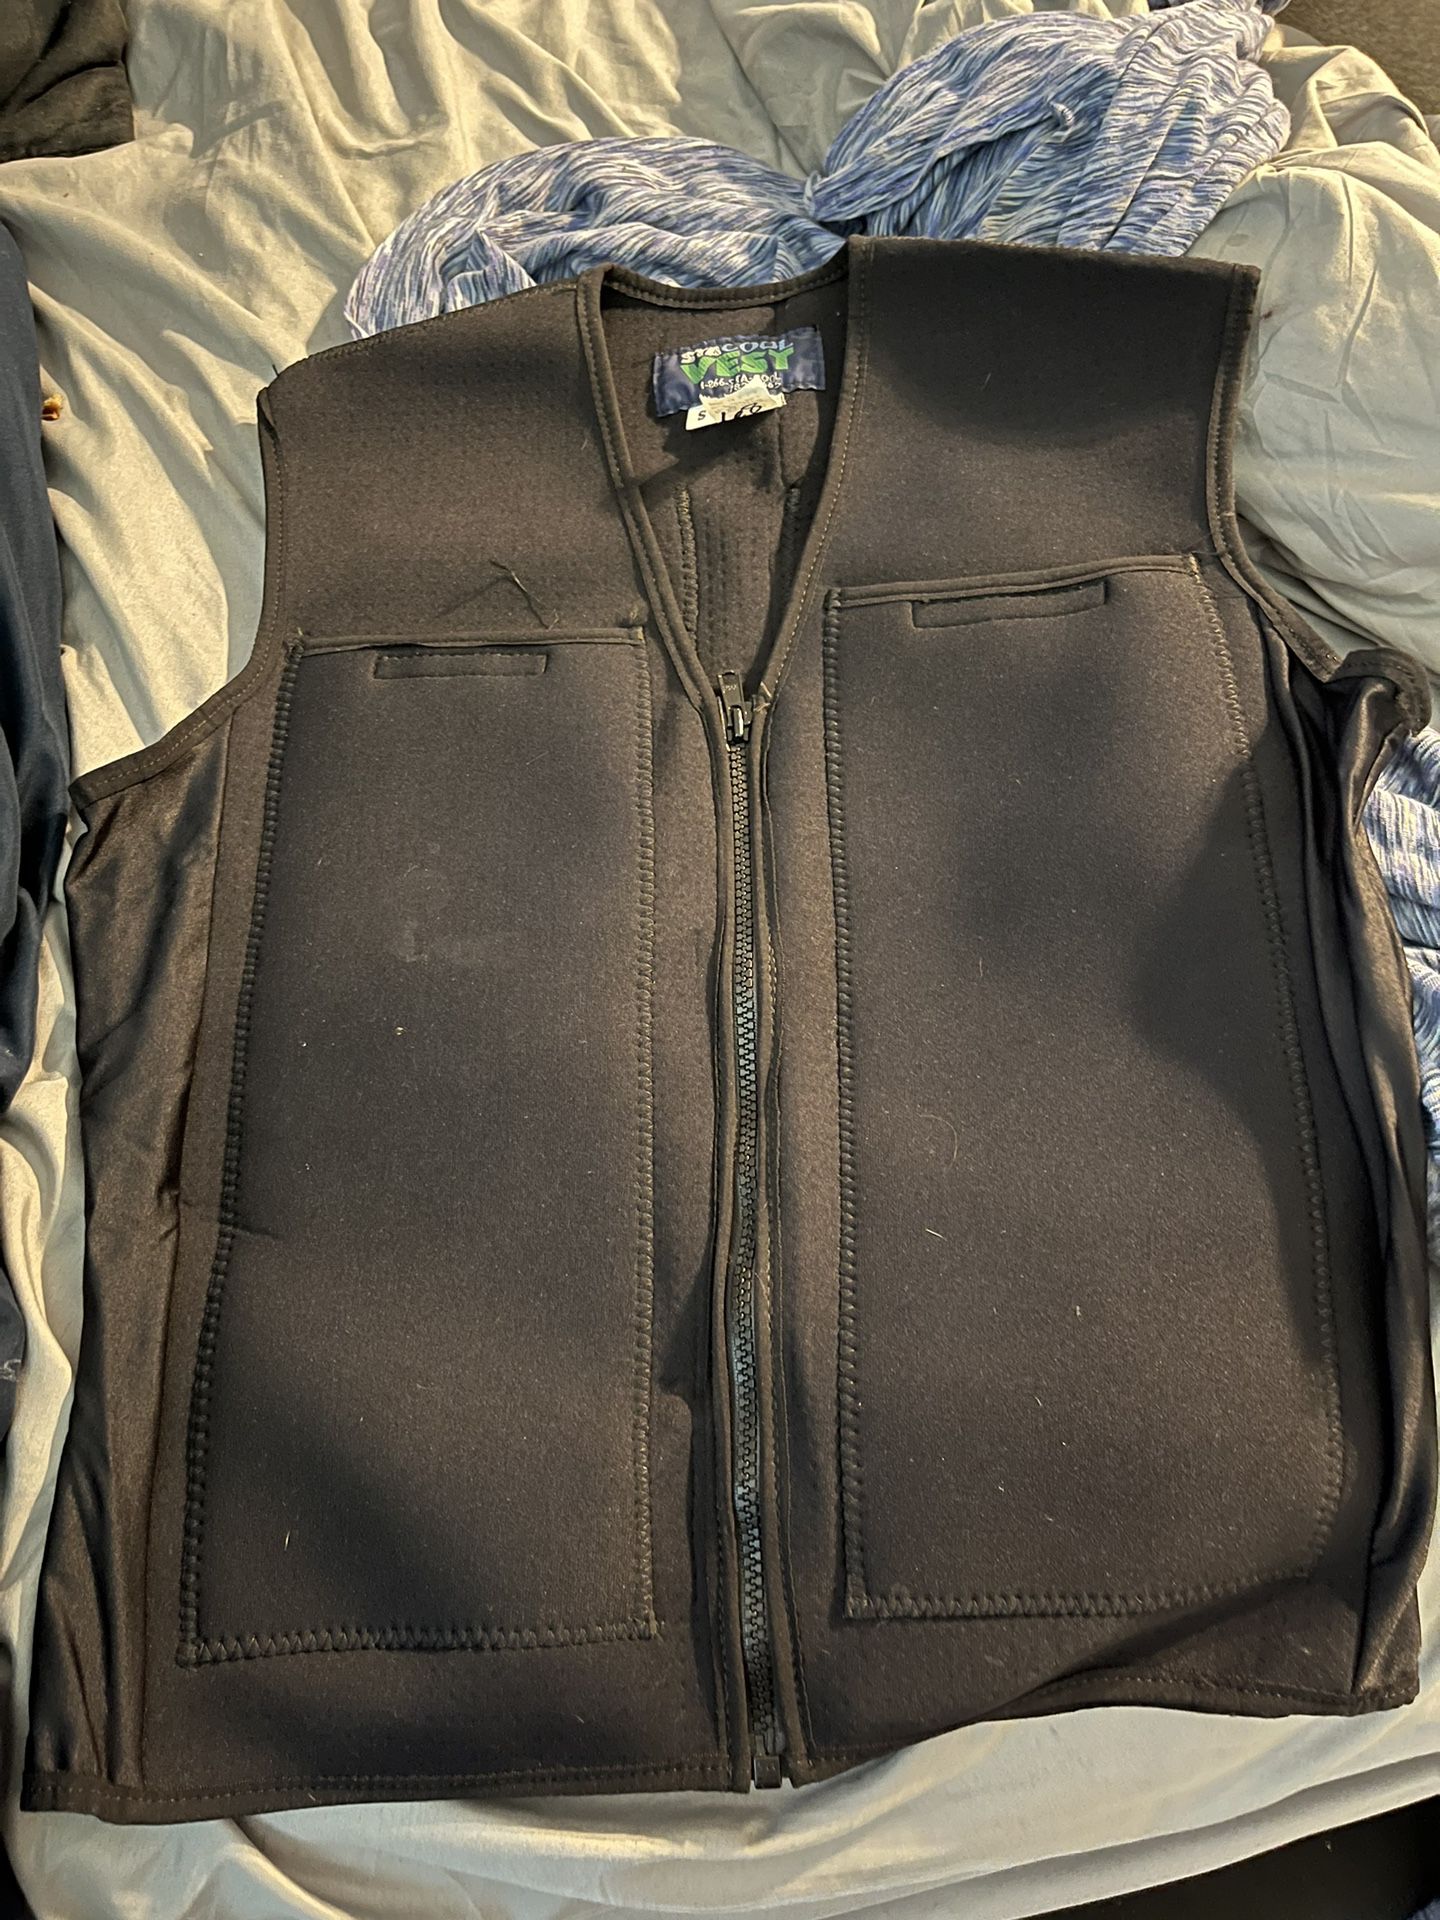 Stacool (cooling vest) Size Small 